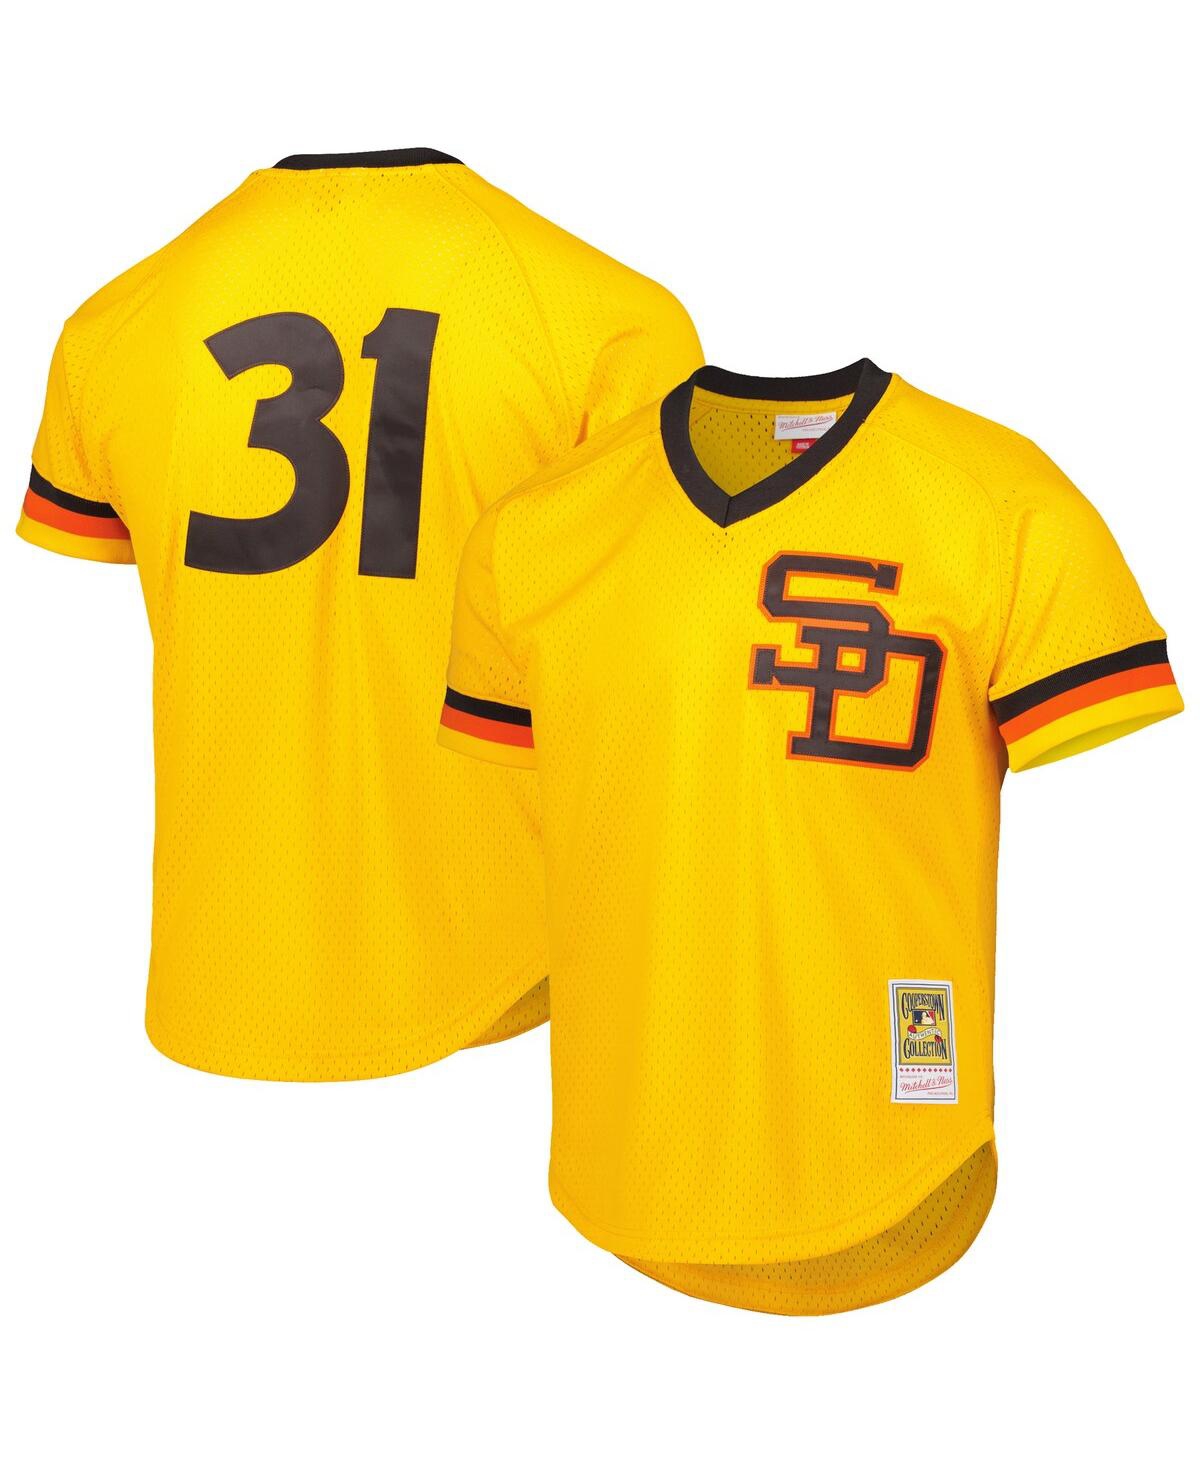 Men's Mitchell & Ness Dave Winfield Gold San Diego Padres Cooperstown Collection Mesh Batting Practice Jersey - Gold